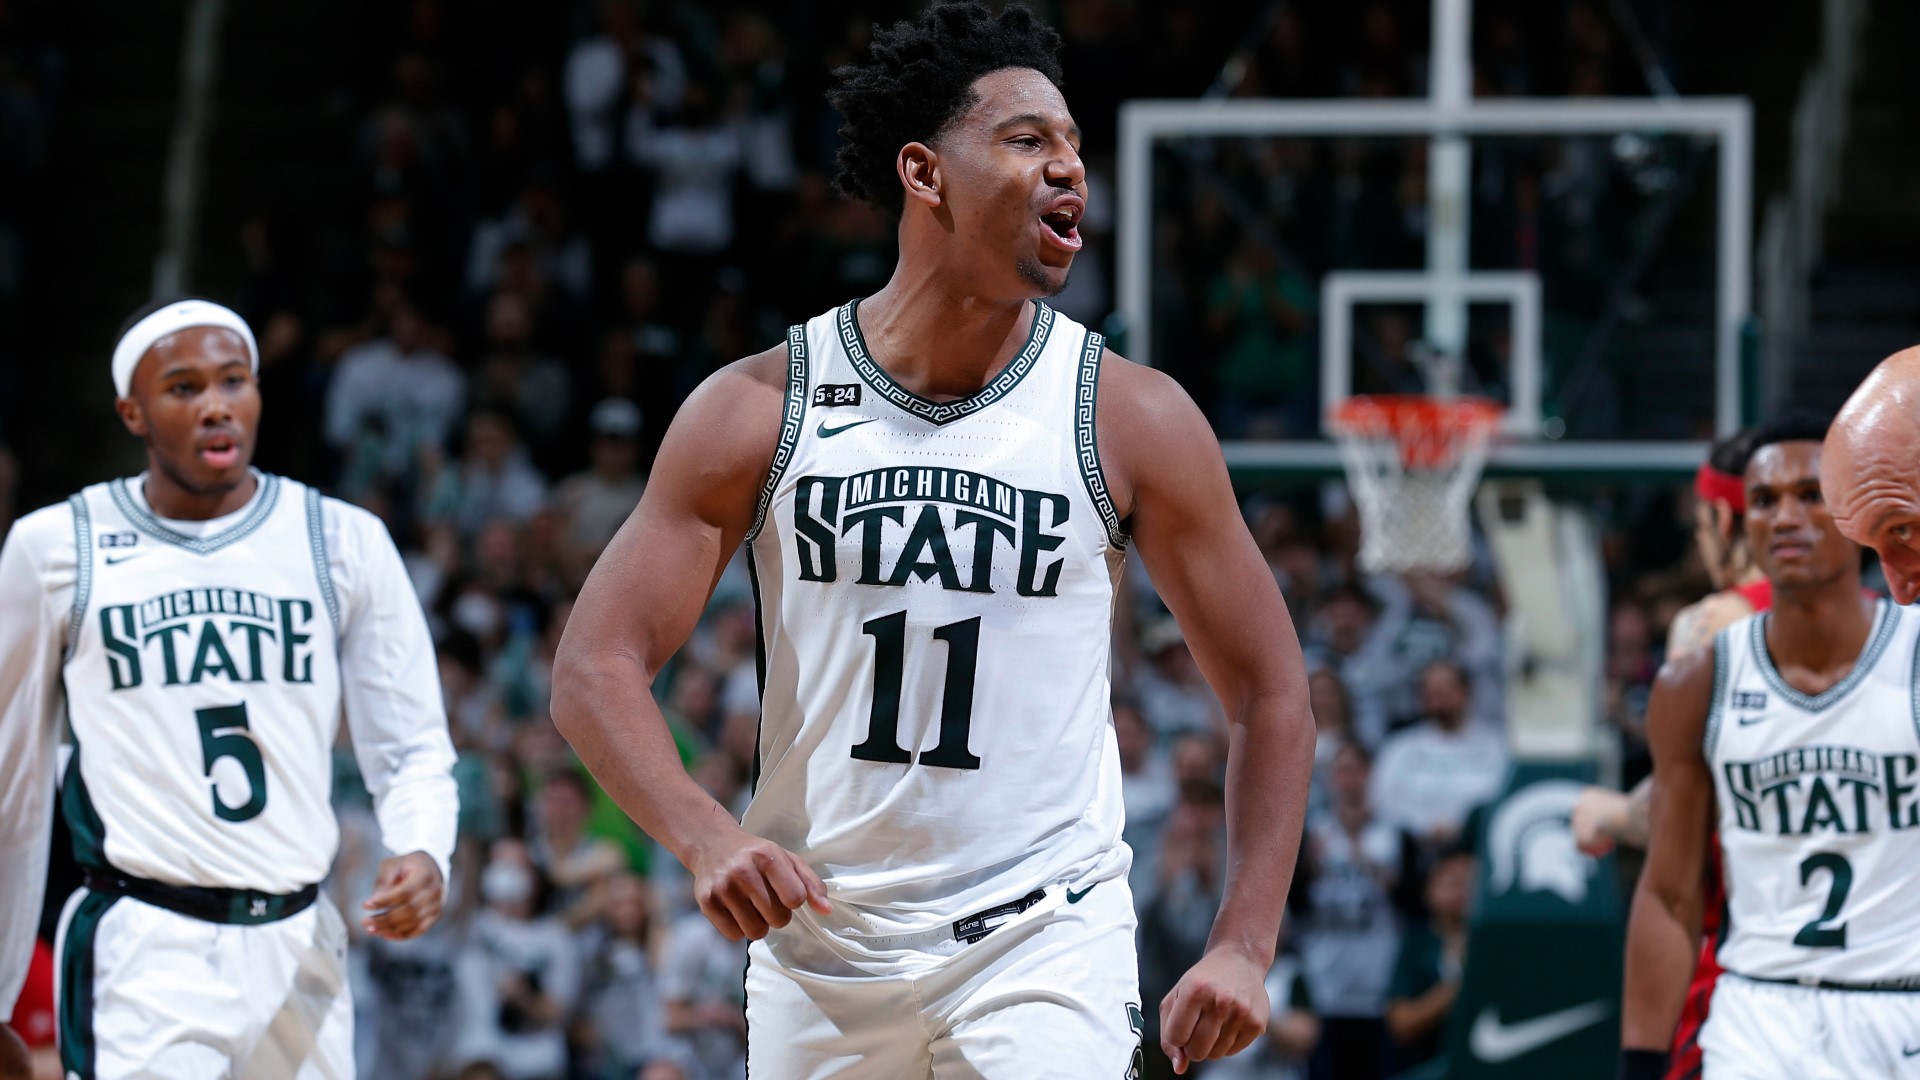 A.J. Hoggard had 16 points and seven assists to help four teammates reach double figures, lifting Michigan State to a 70-57 win over No. 23 Rutgers on Thursday night